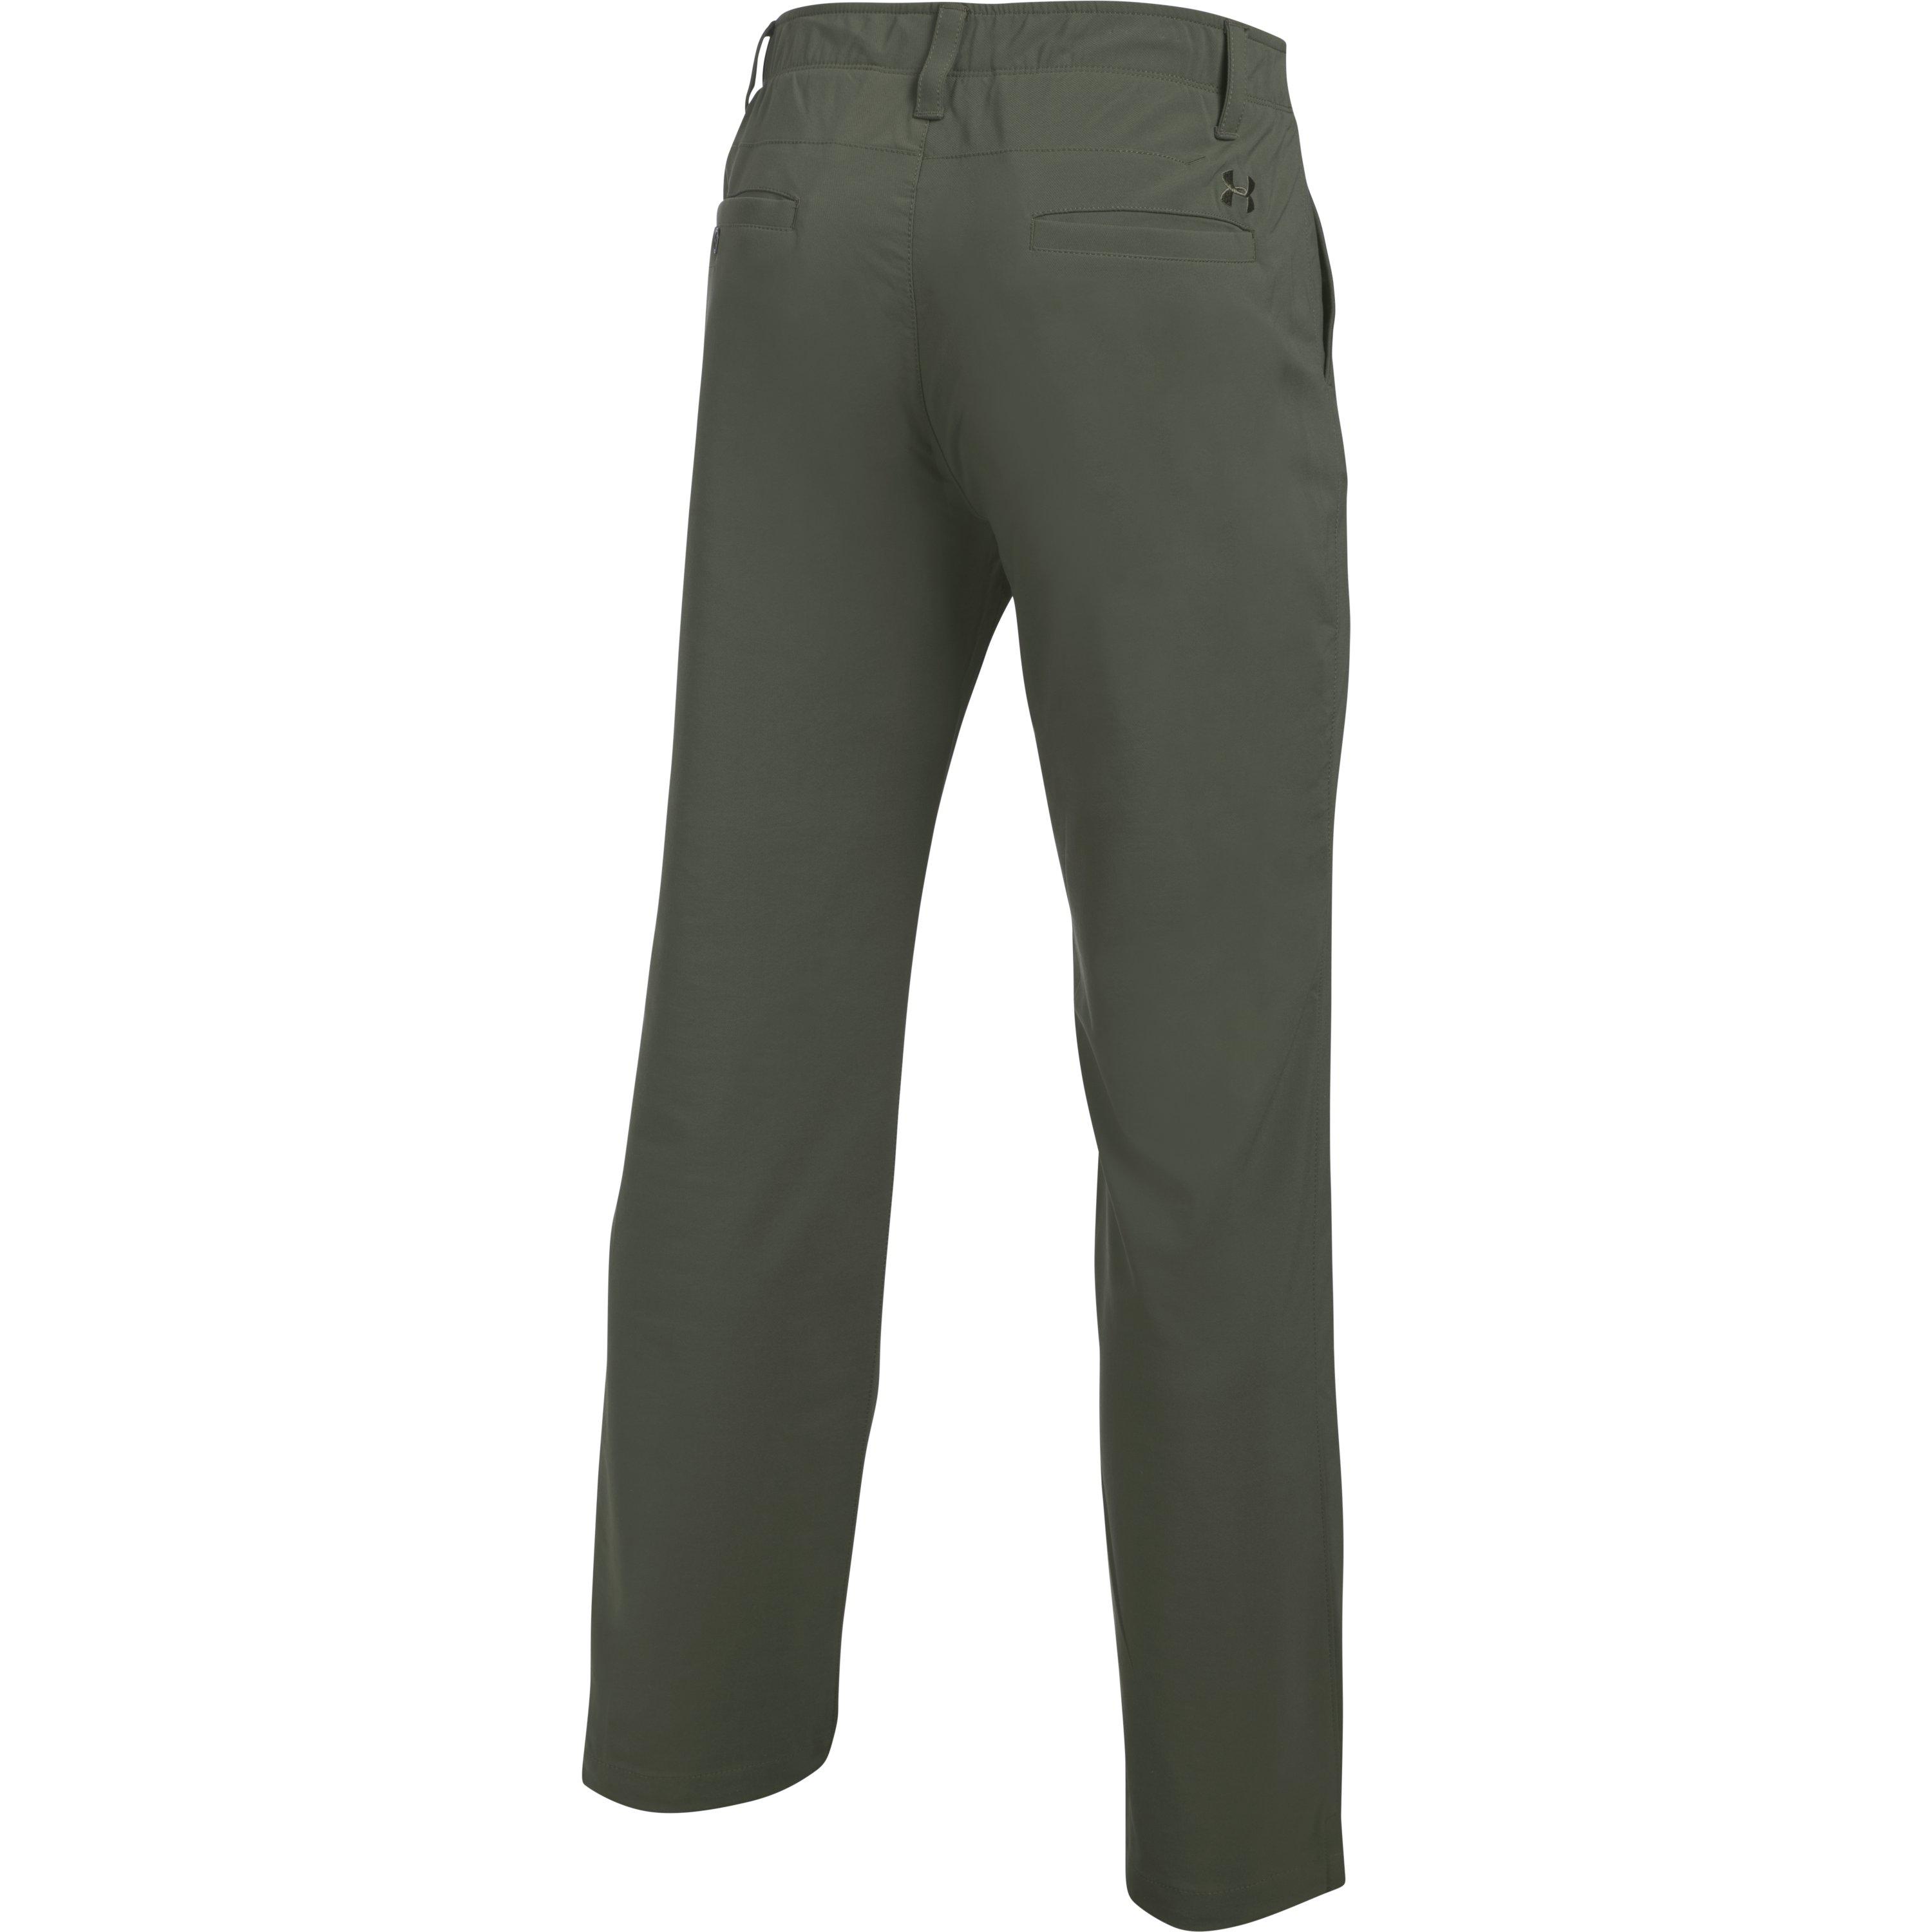 Under Armour Men's Ua Match Play Golf Pants in Green for Men